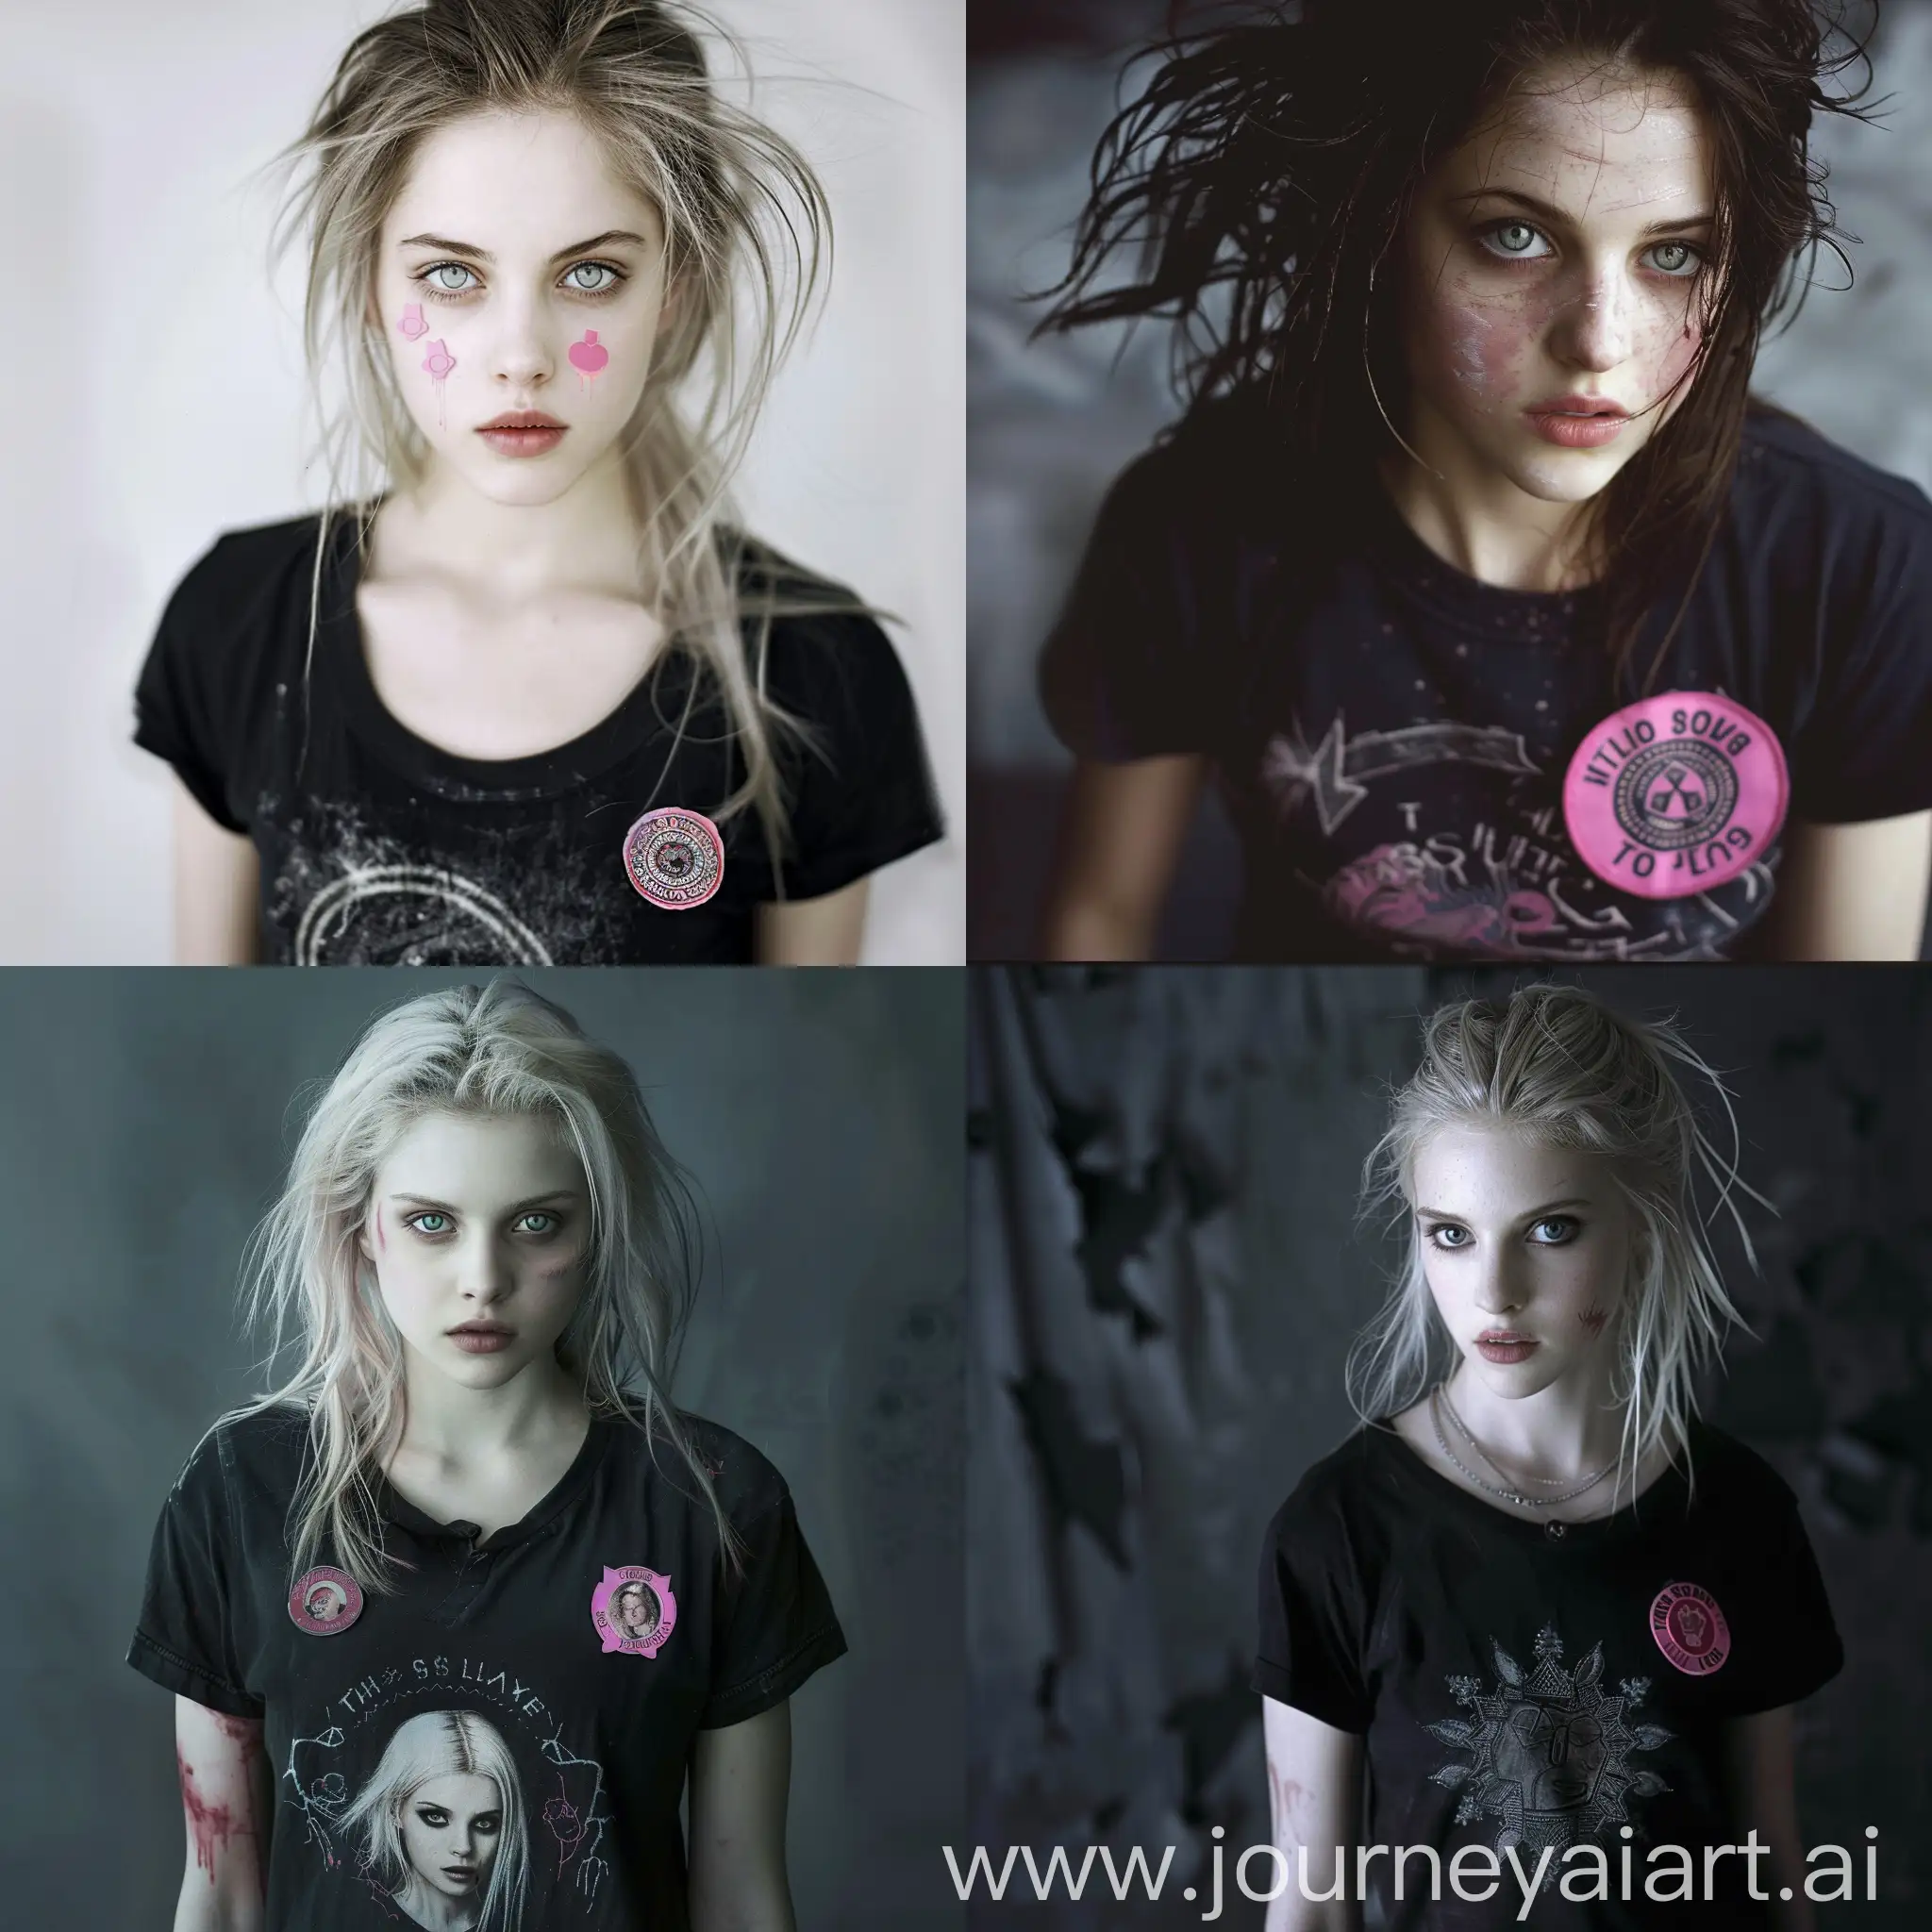  Bella swan From the twilight saga eclipse, emo style, pale skin on the face, pink badges on a black T-shirt